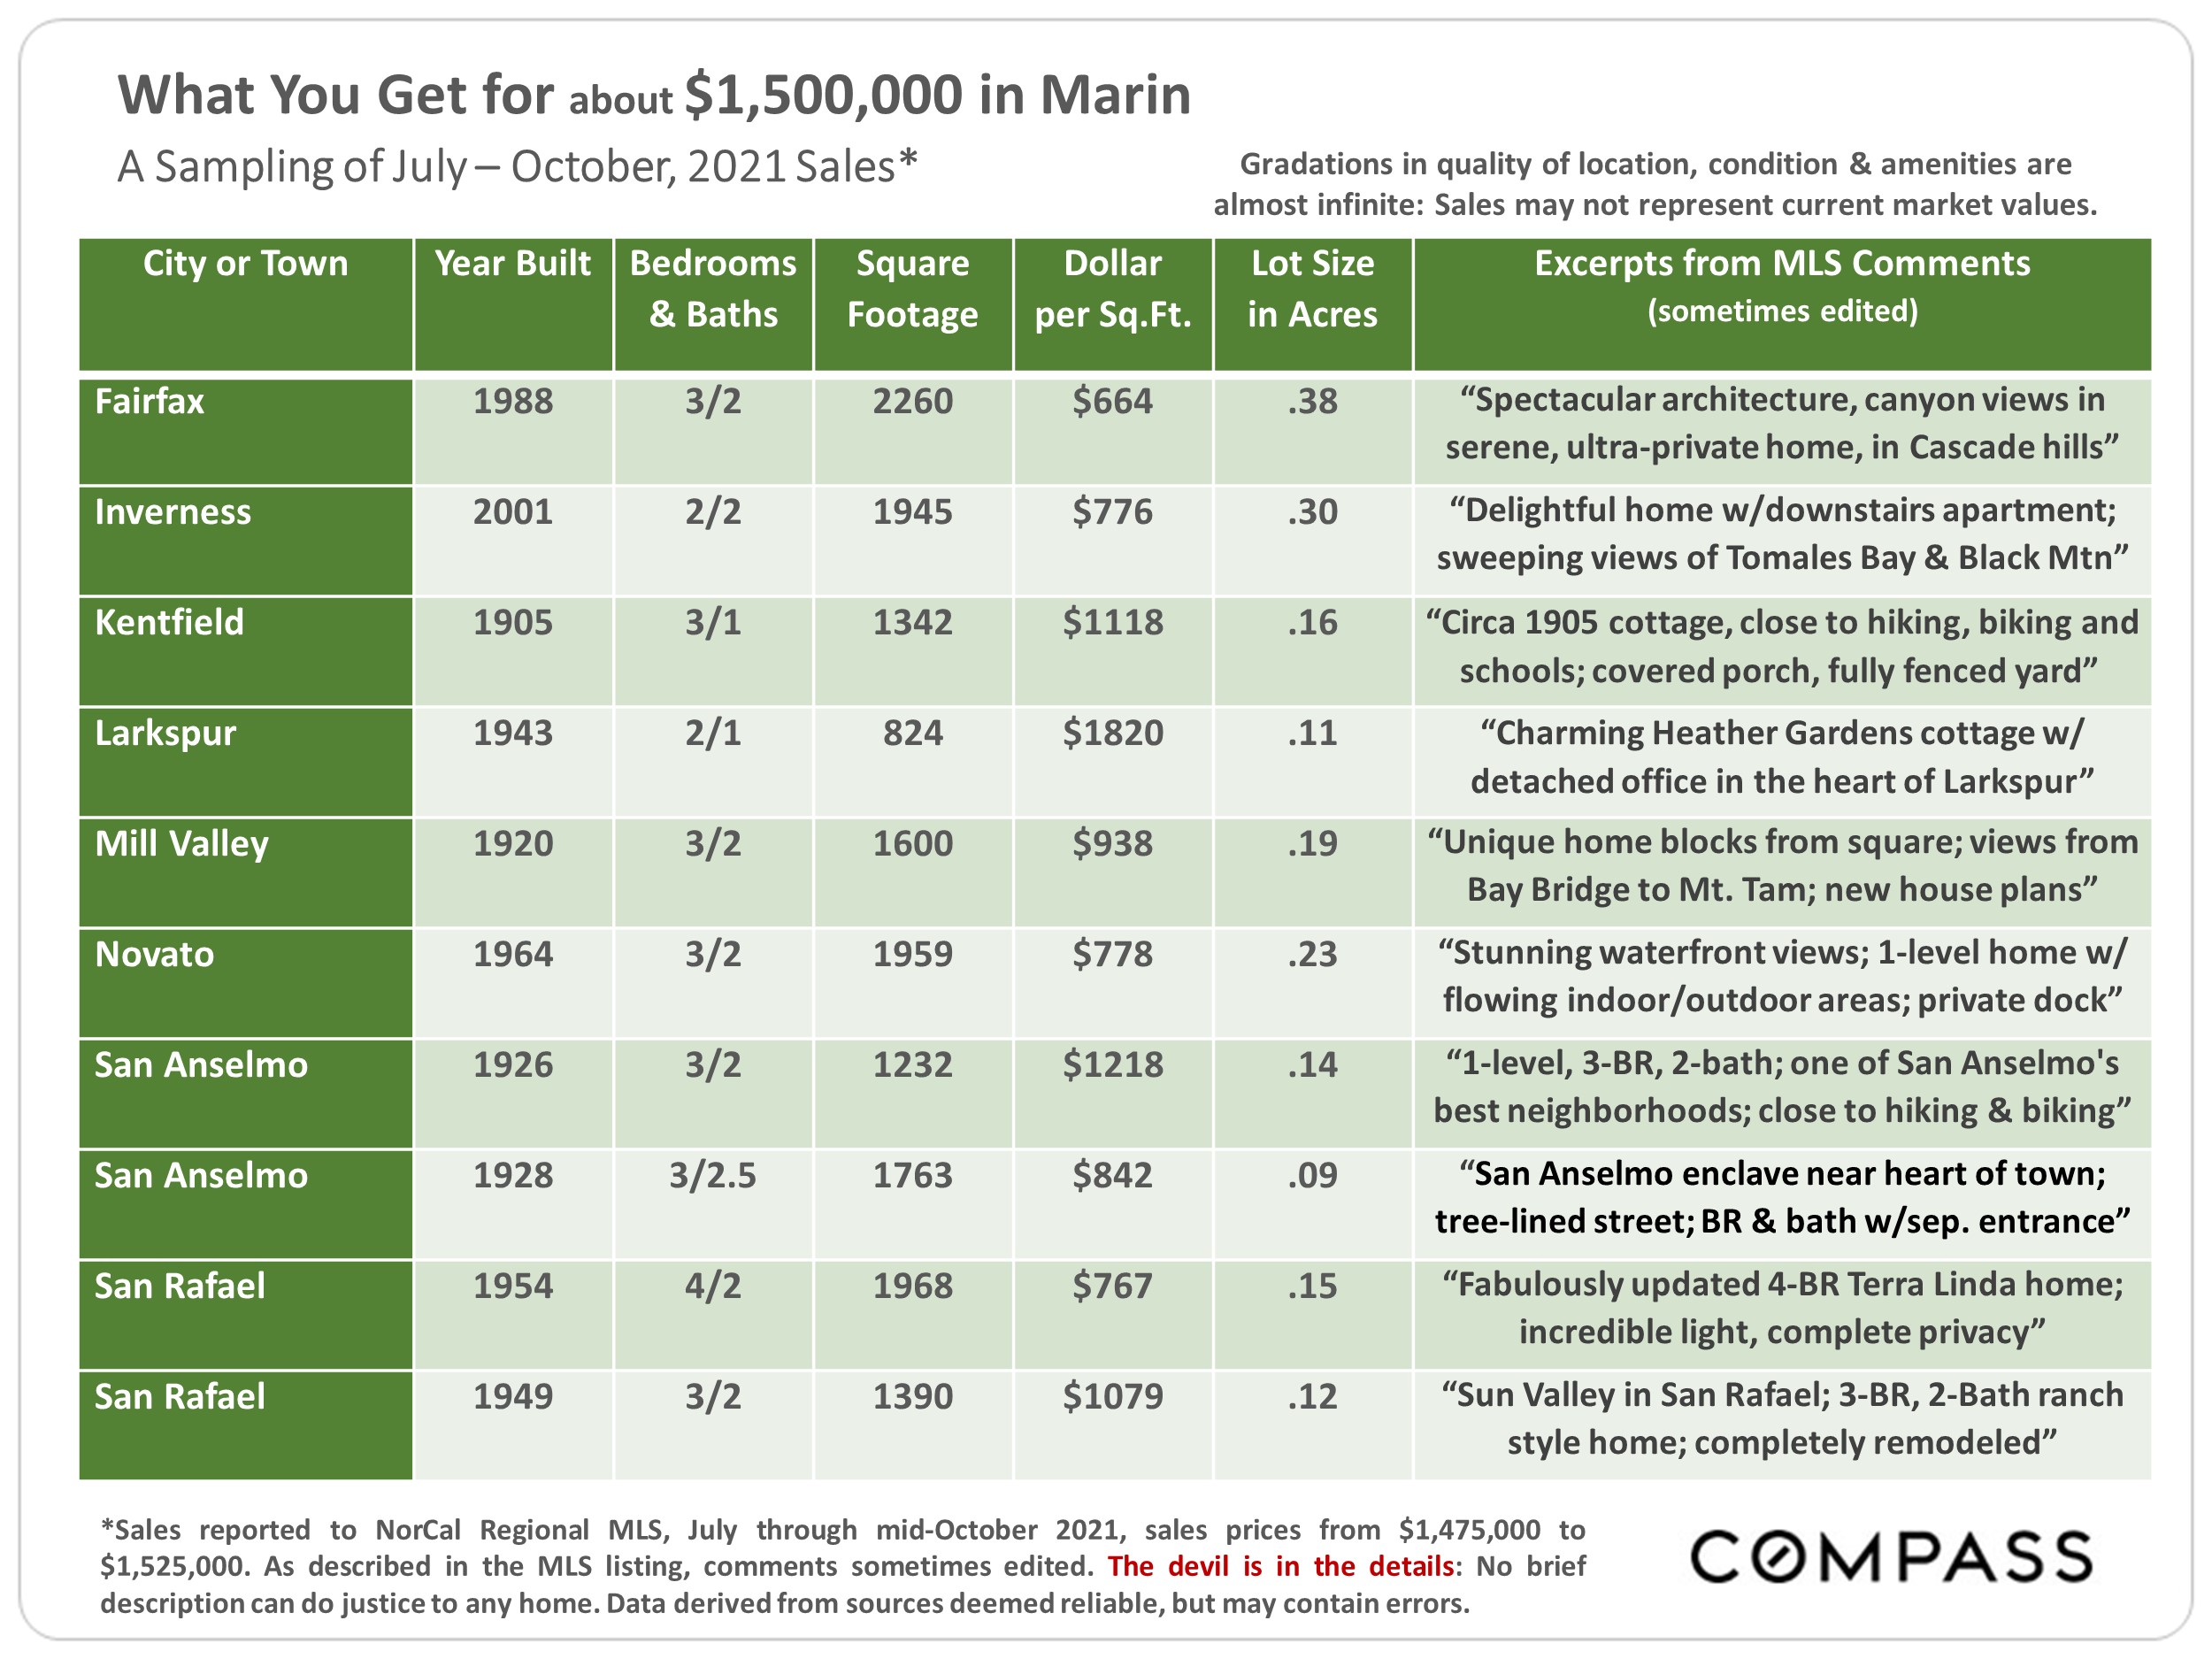 table showing what you get for $1.5M in different Marin cities